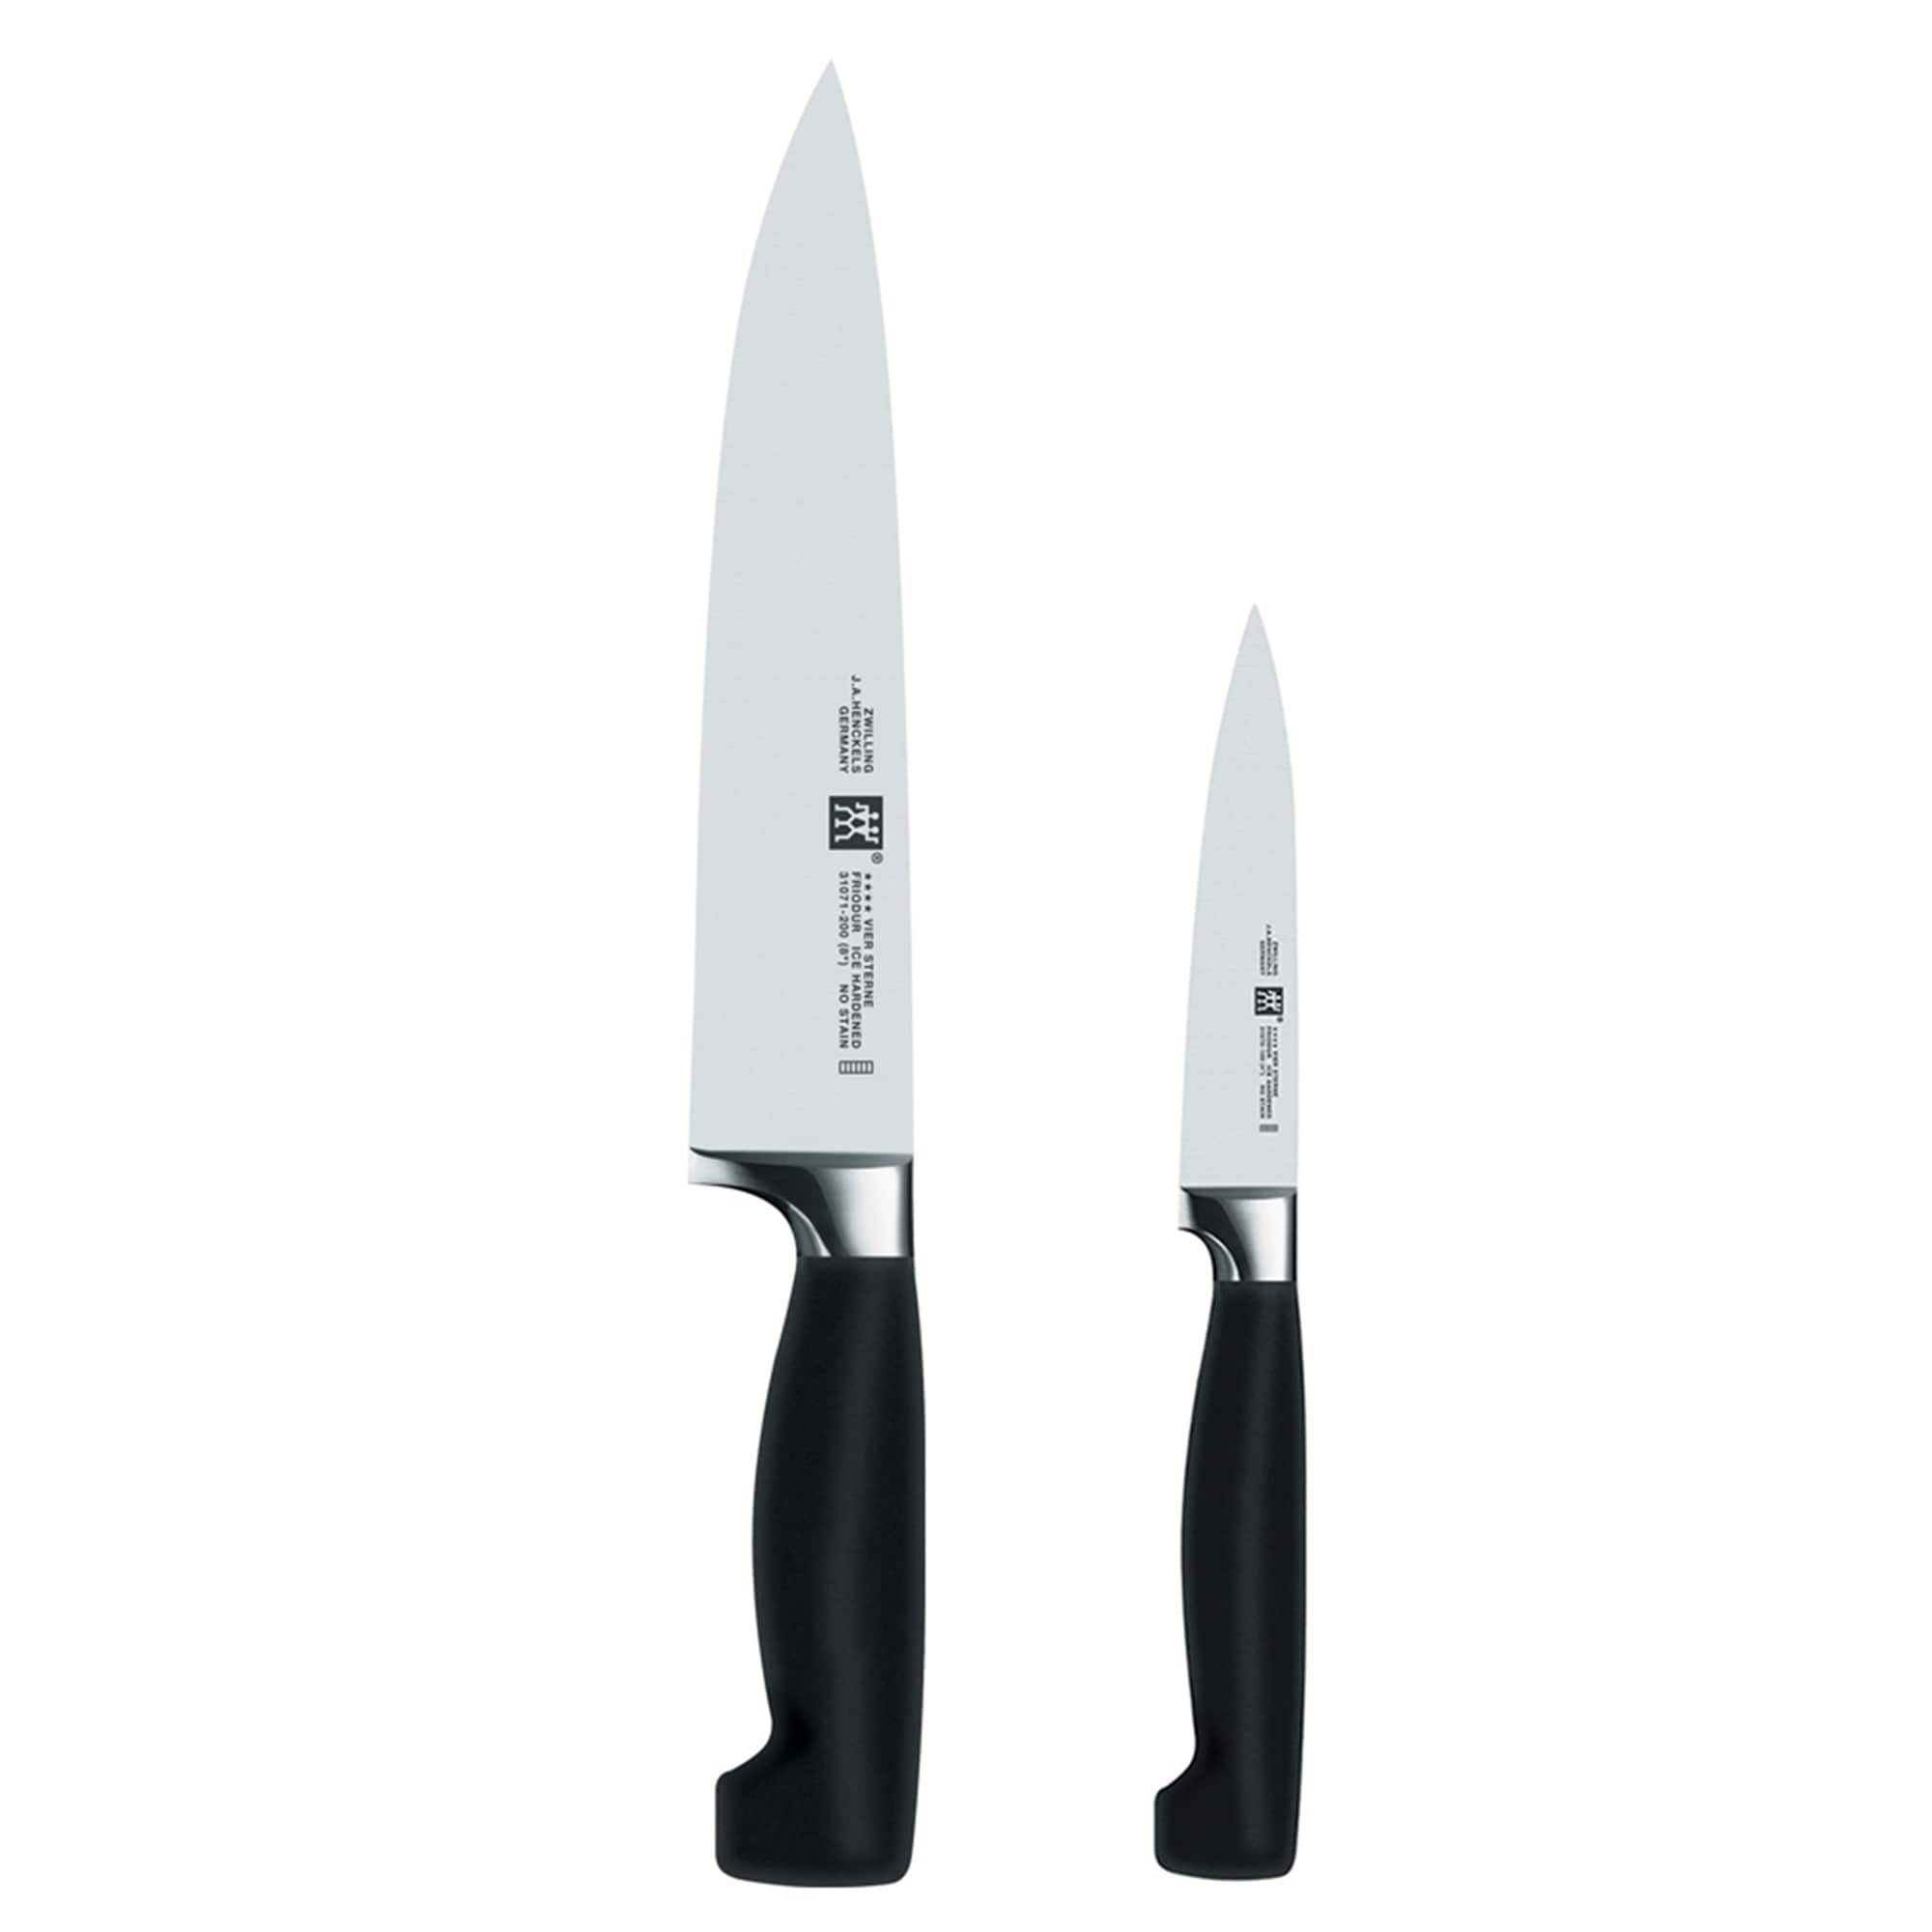  Ronco Six Star+ Professional Carving Knife (#2) Style